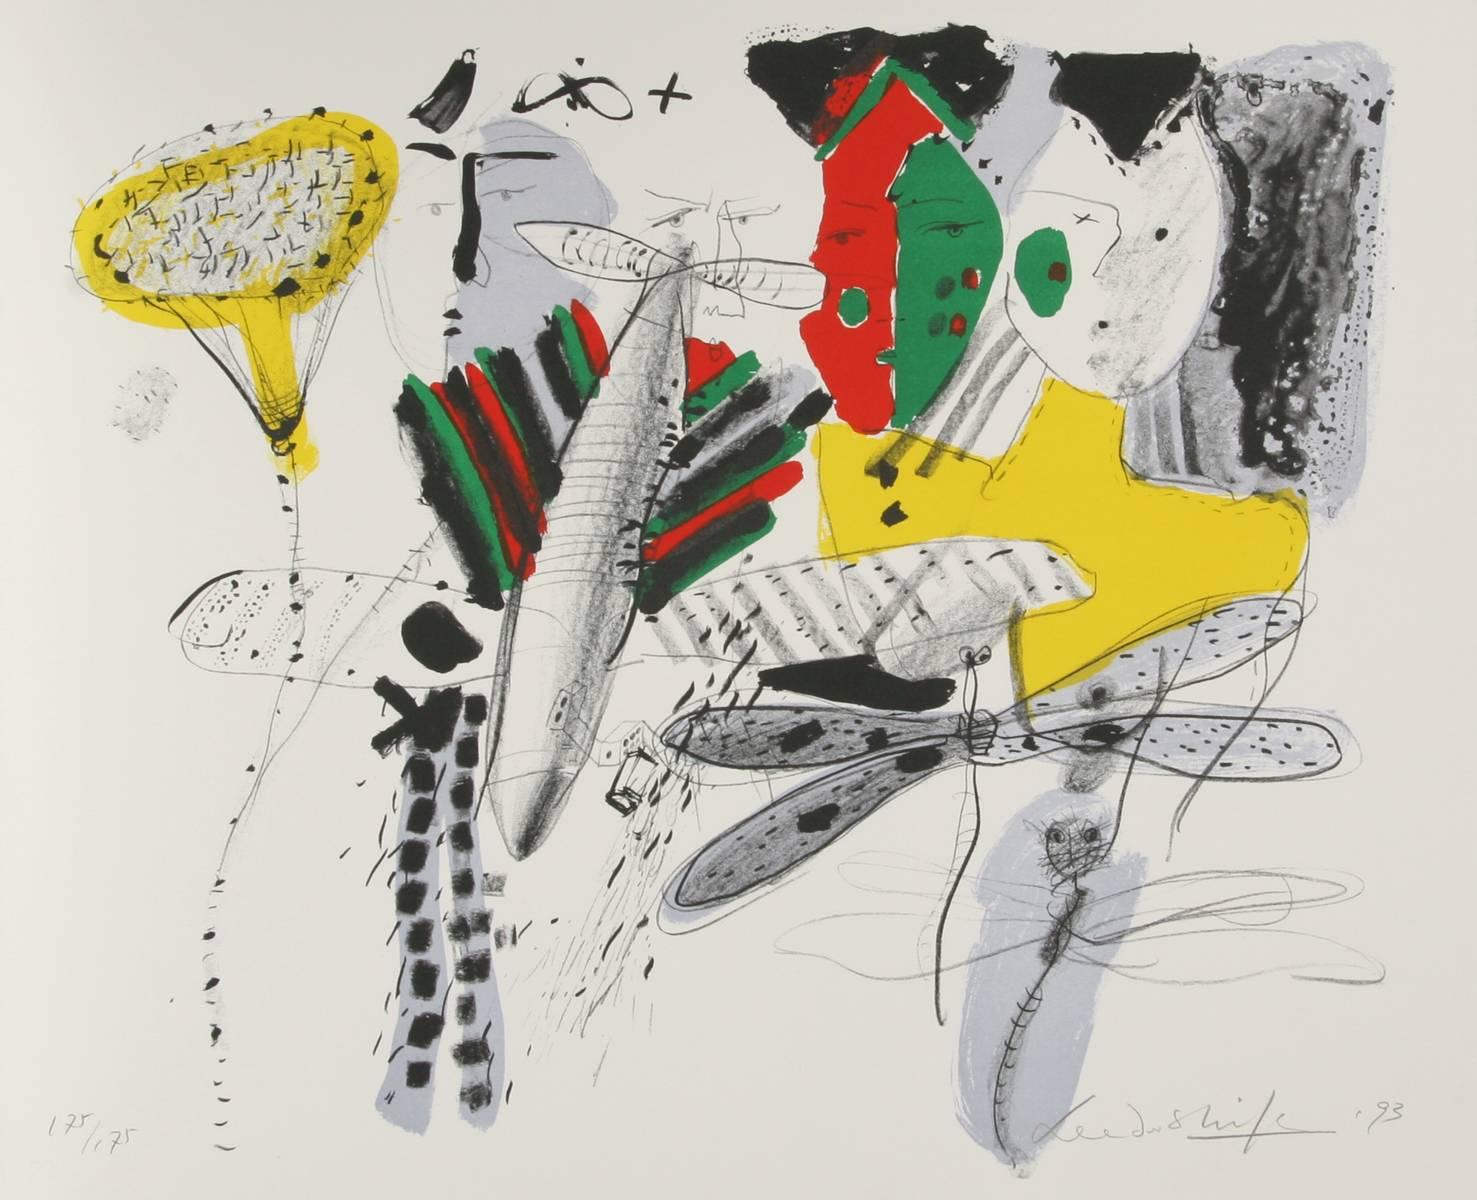 Artist: Doo Shik Lee, Korean (1947 - 2013)
Title: Impressions of Women
Year: 1993
Medium: Suite of Five Lithographs on Arches, Each signed and numbered in pencil
Edition: 175 
Size: 22 in. x 26.5 in. (55.88 cm x 67.31 cm)